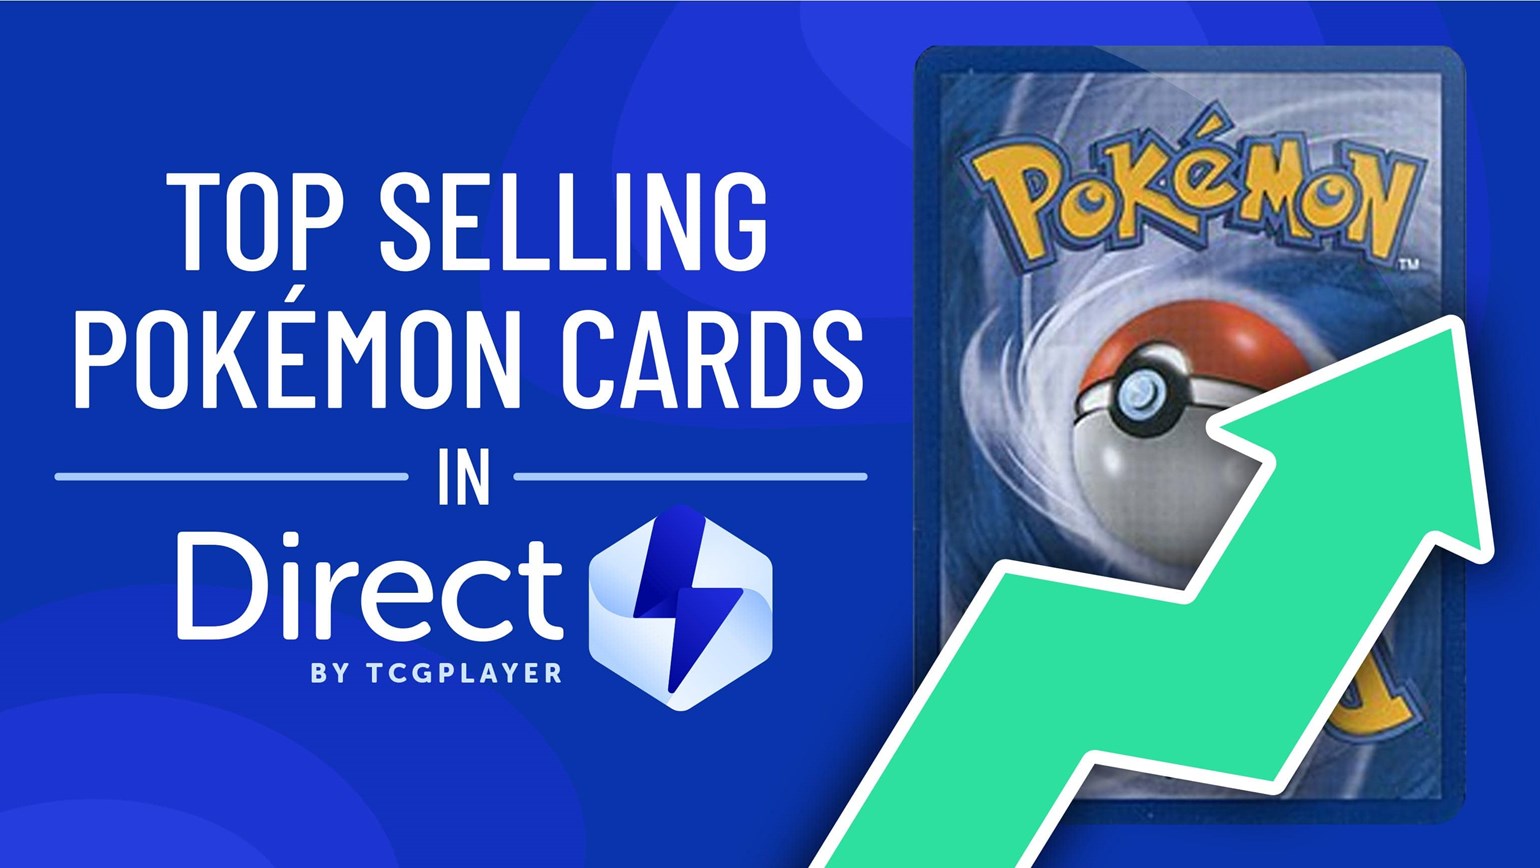 August Top Selling Pokémon Cards in Direct by TCGplayer